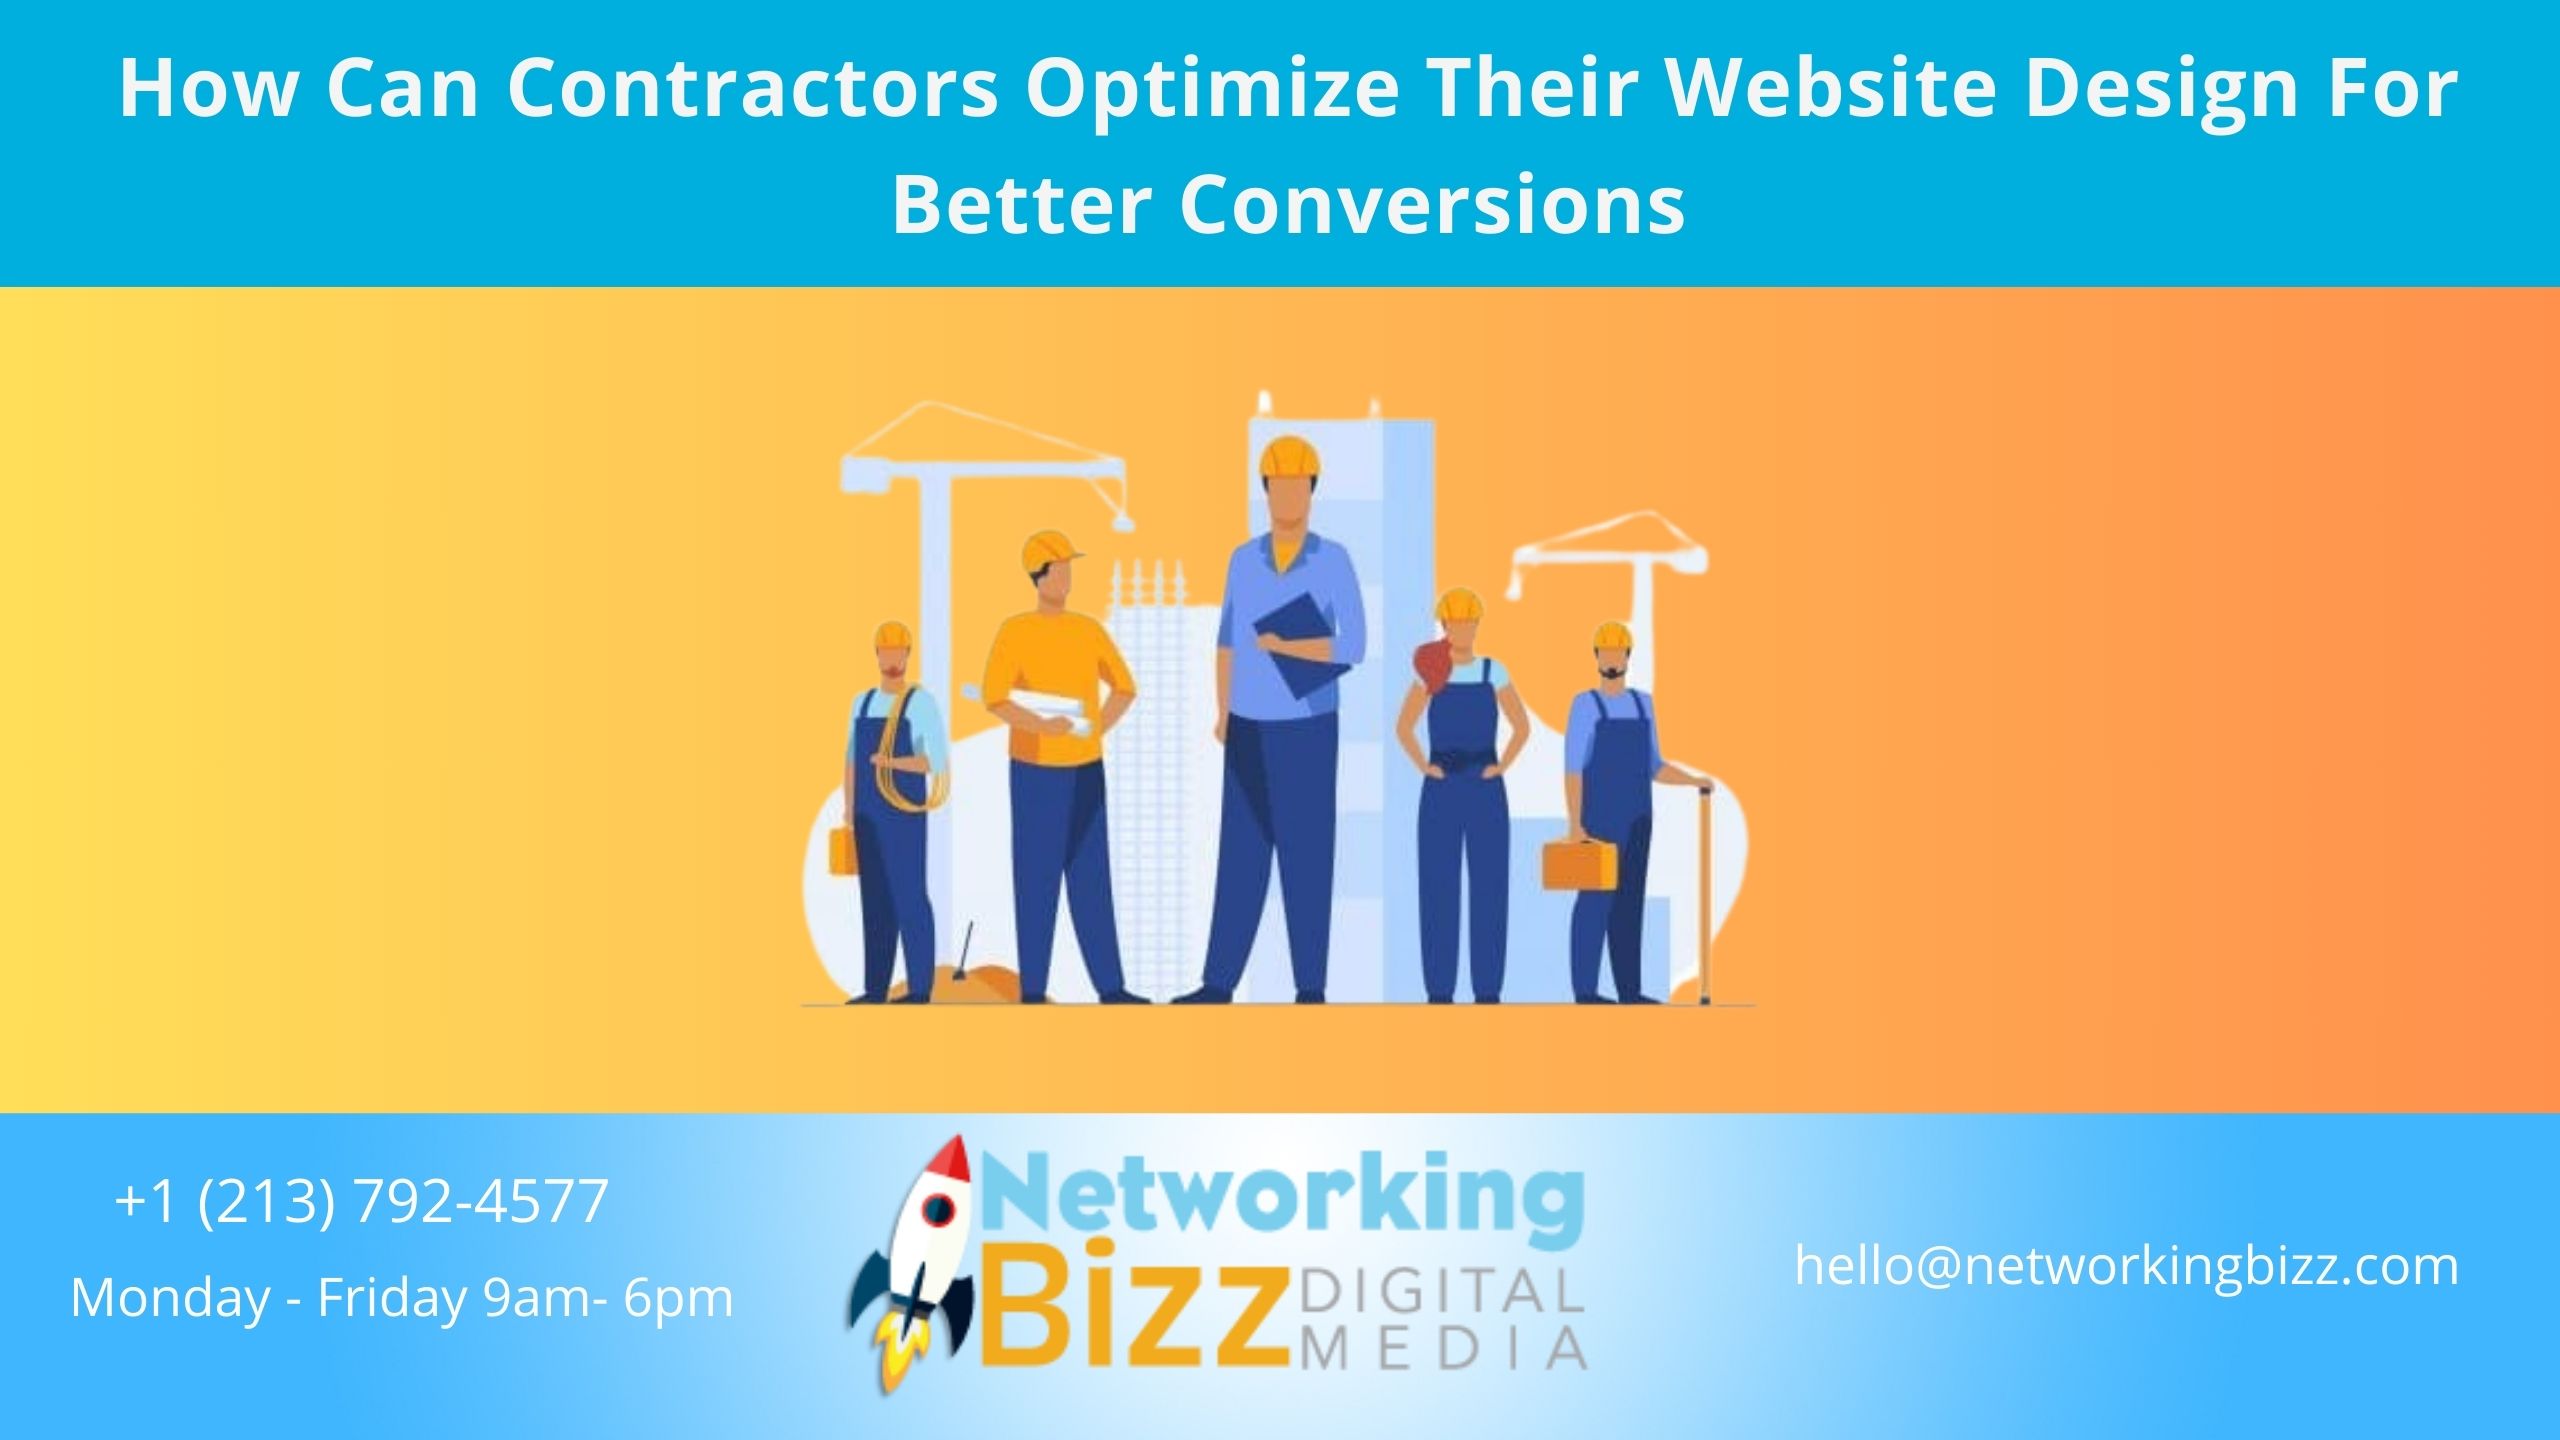 How Can Contractors Optimize Their Website Design For Better Conversions